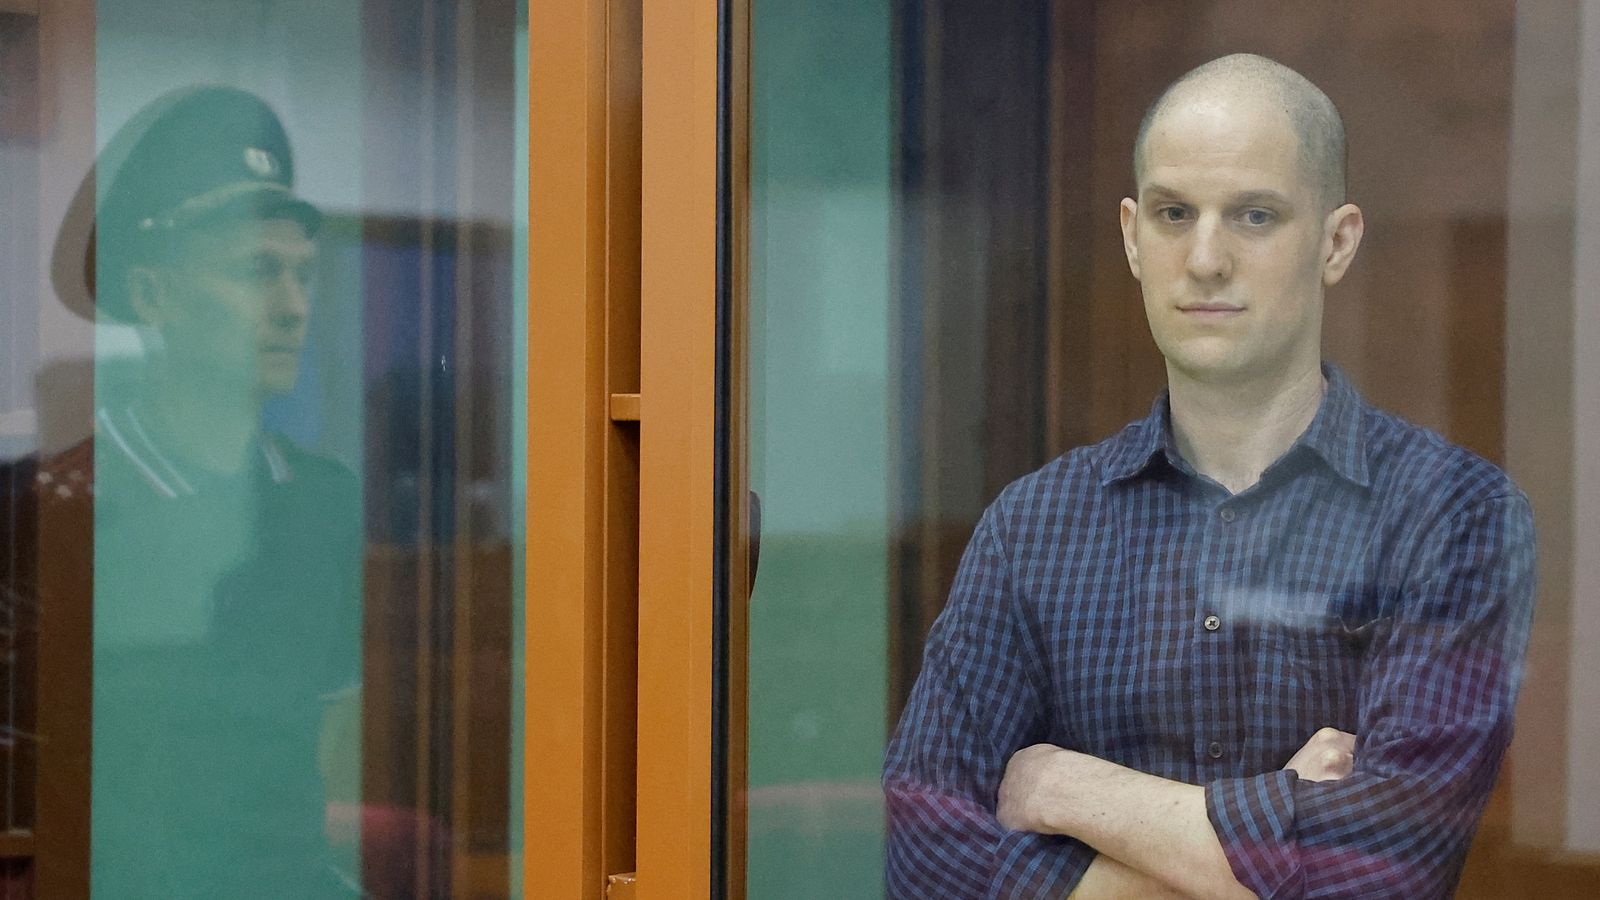 Evan Gershkovich: US journalist seen with shaved head before start of spying trial in Russia